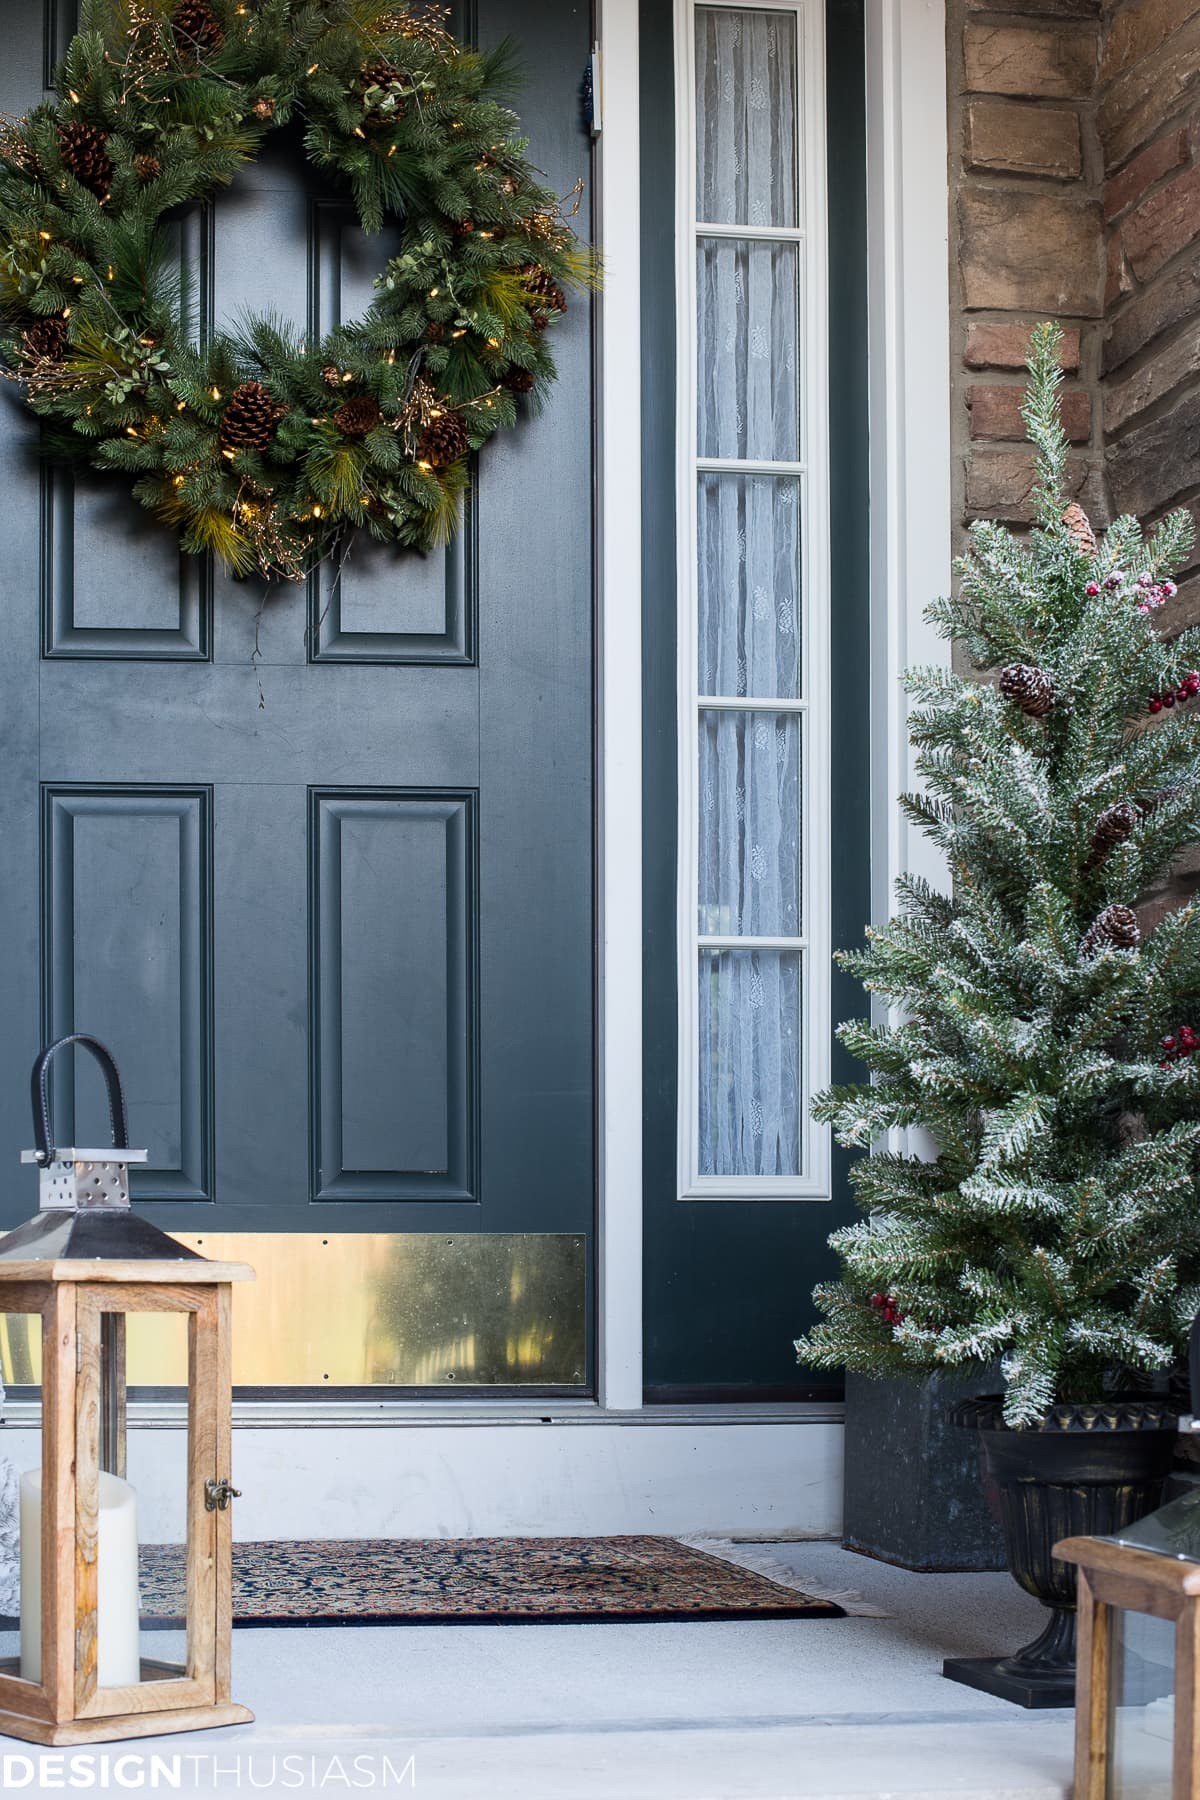 Christmas Decorations For Front Porch
 Easy Outdoor Christmas Decorating Ideas for a Tiny Front Porch